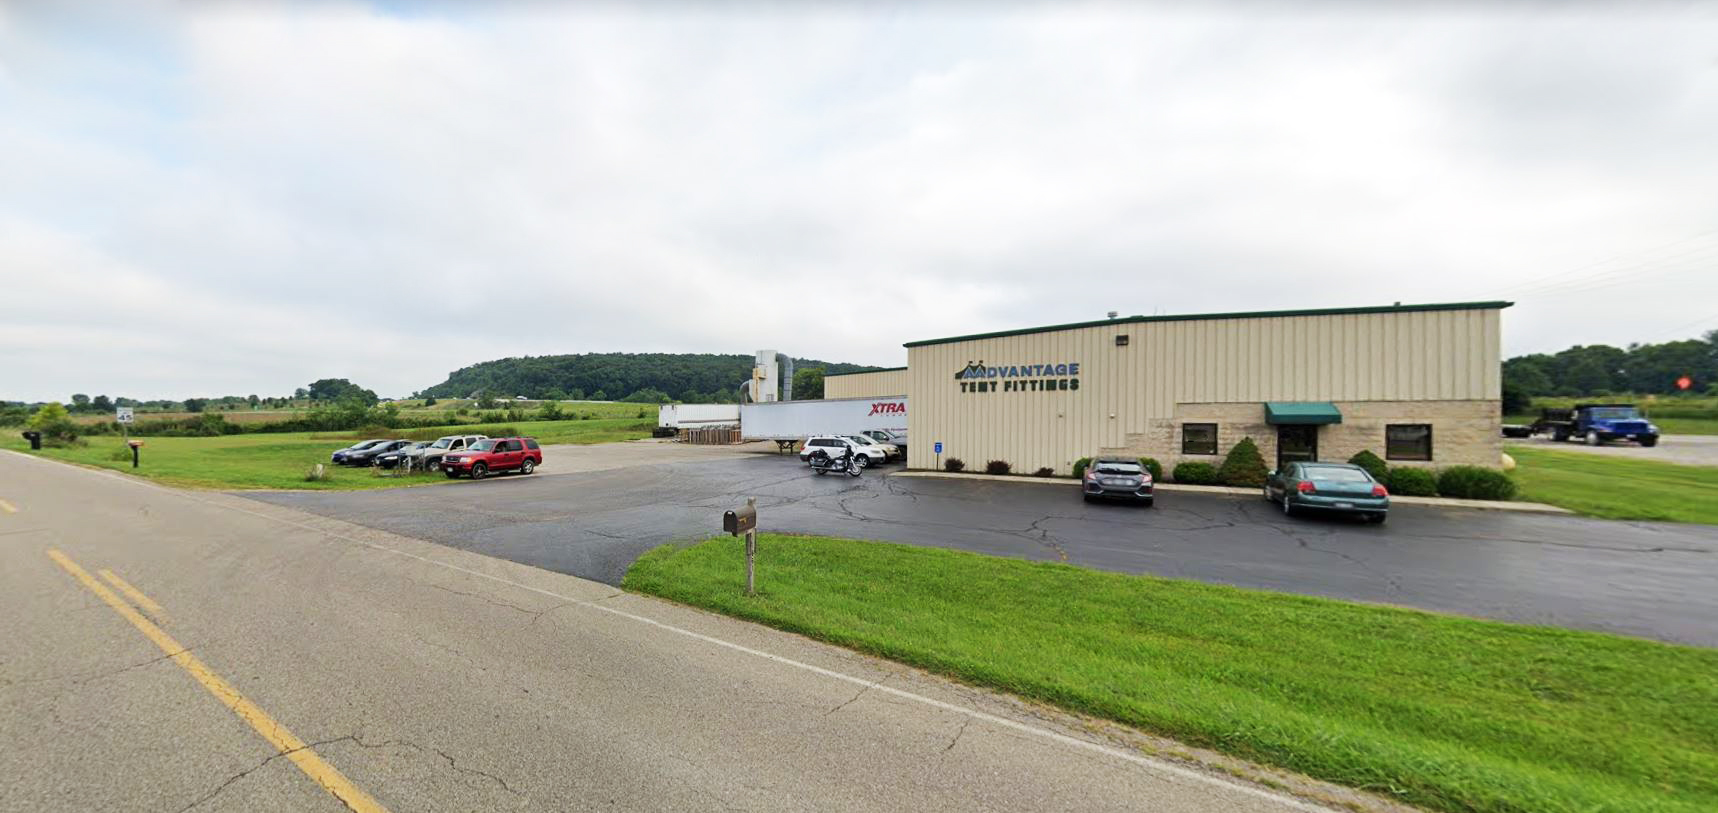 Advantage Tent Fittings, Inc. of Chillicothe Plans Investment to Diversify, Add New Jobs